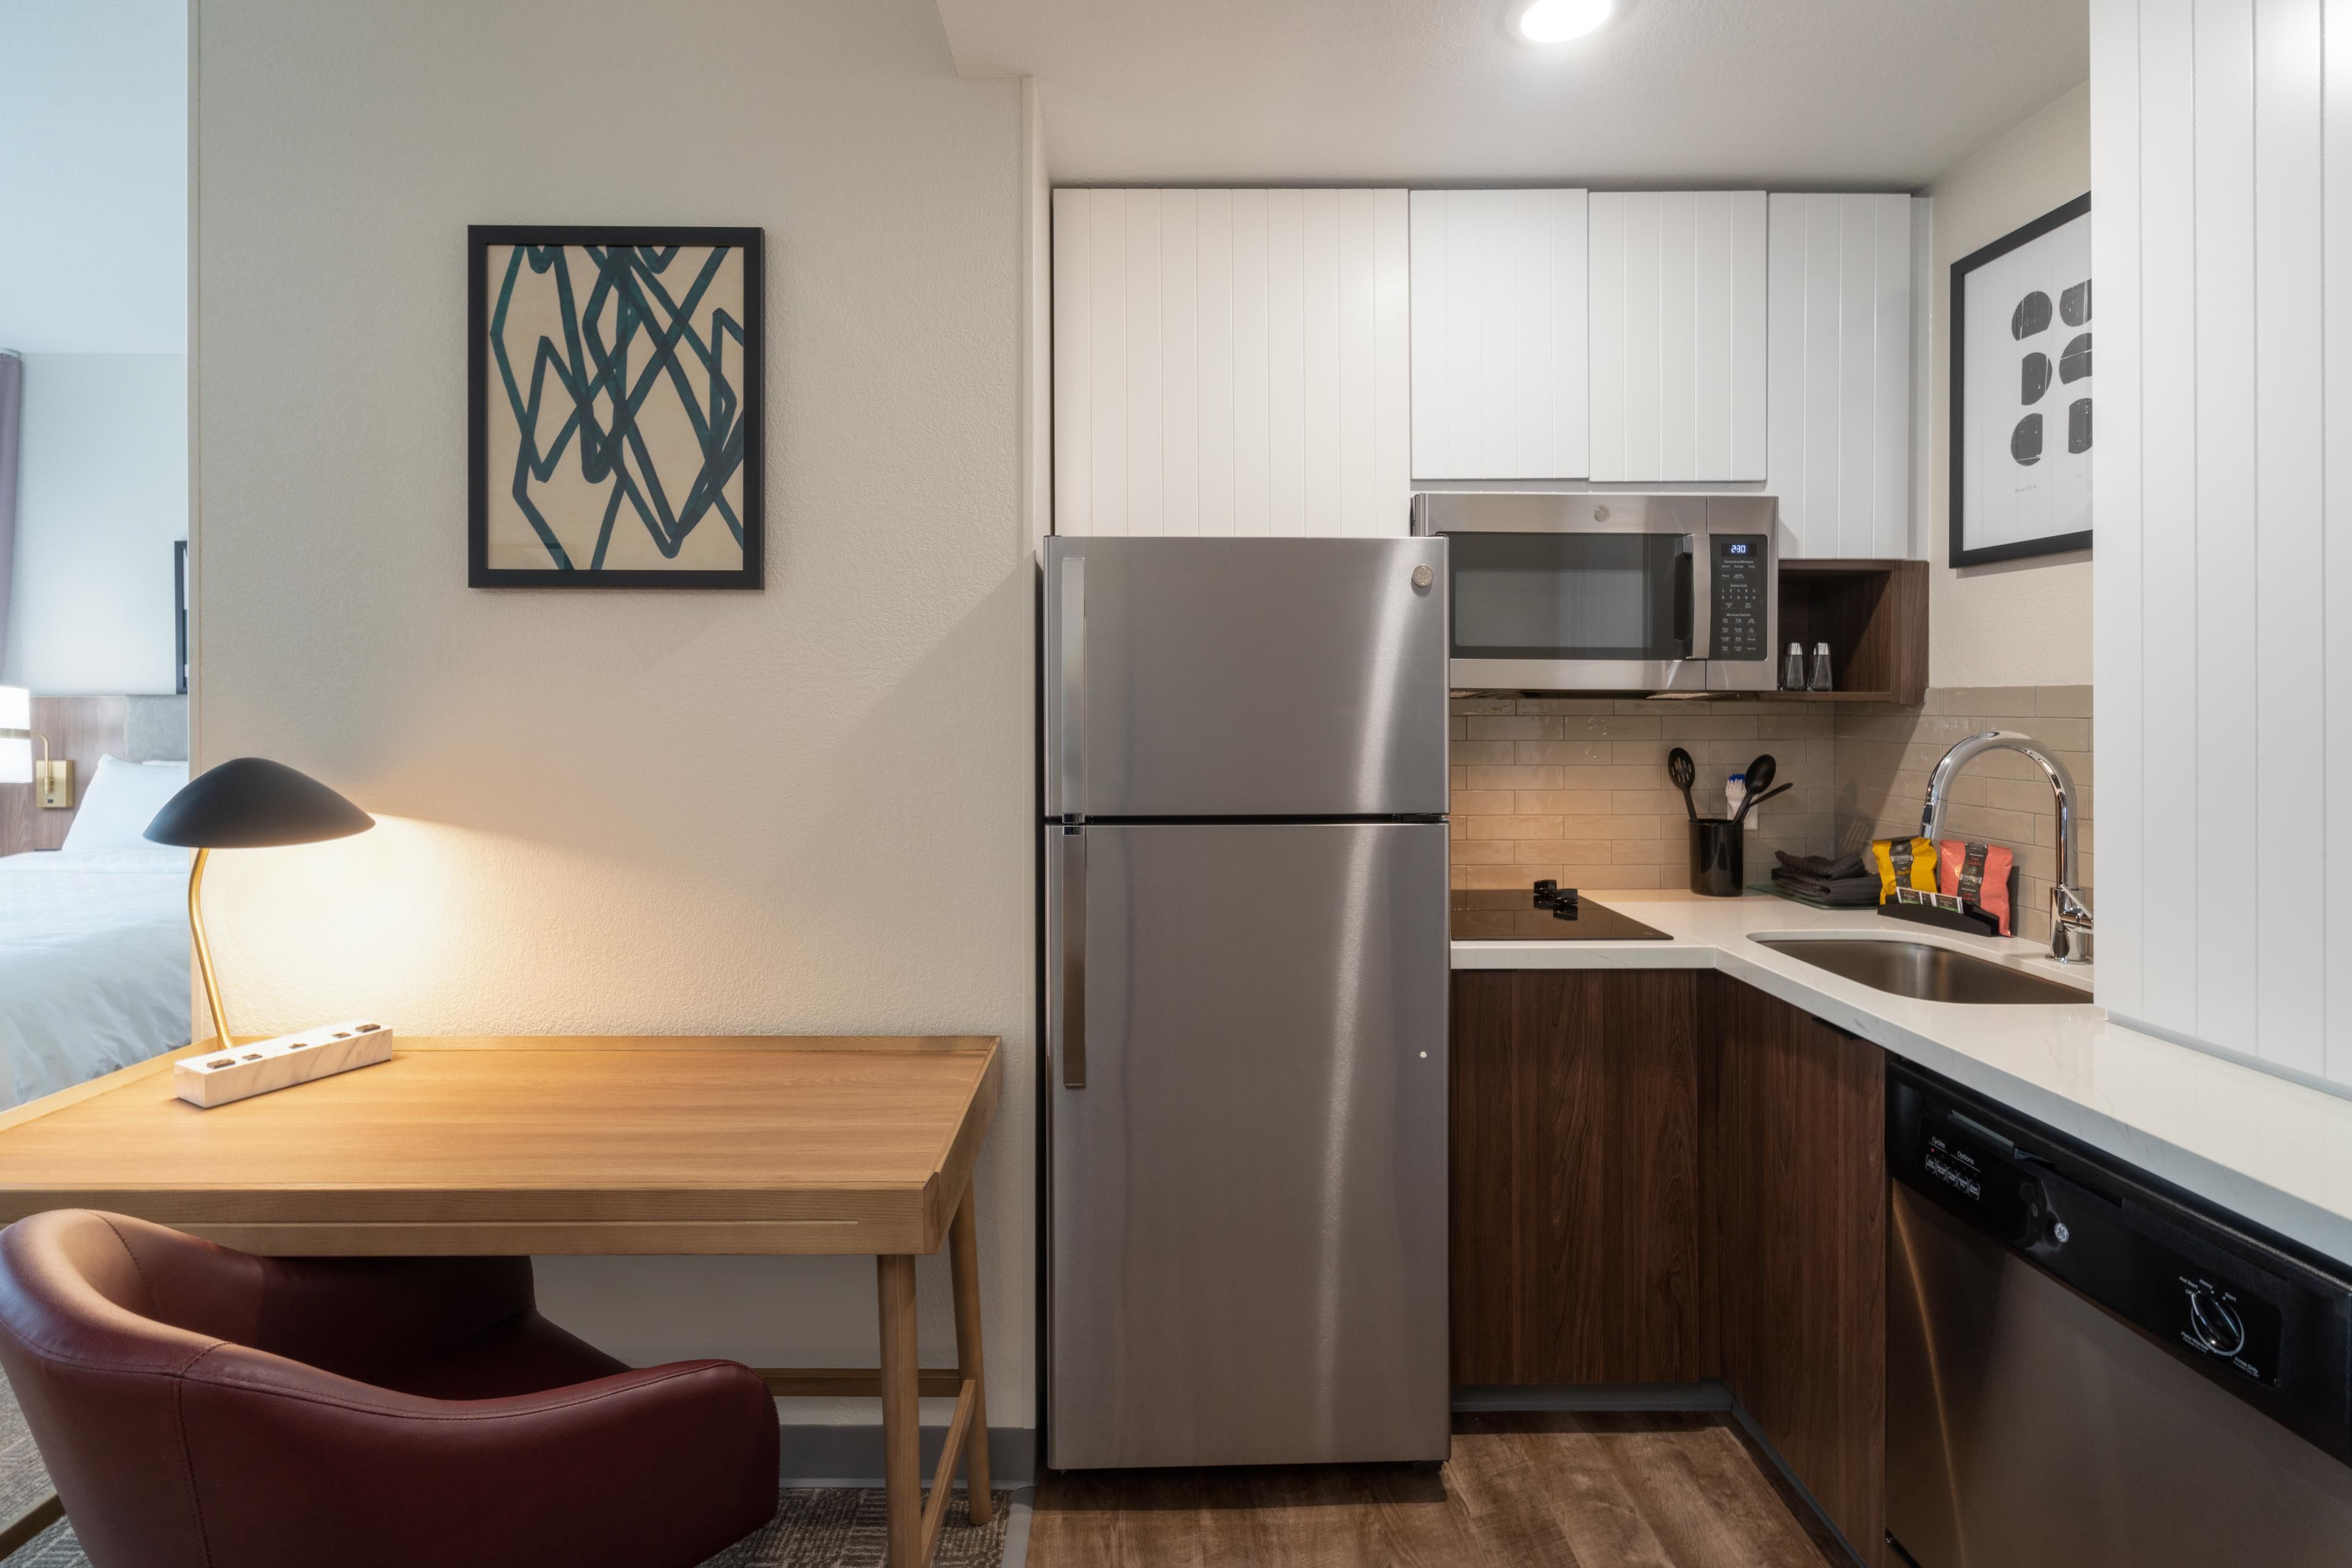 Feel at home in the Staybridge Suites Flowood - NW Jackson.  Every room features a full kitchen with fridge, microwave, stove, and dishes.  No need to go out and fight the crowds at restaurants, enjoy cooking dinner and relaxing in the comfort of your room. 